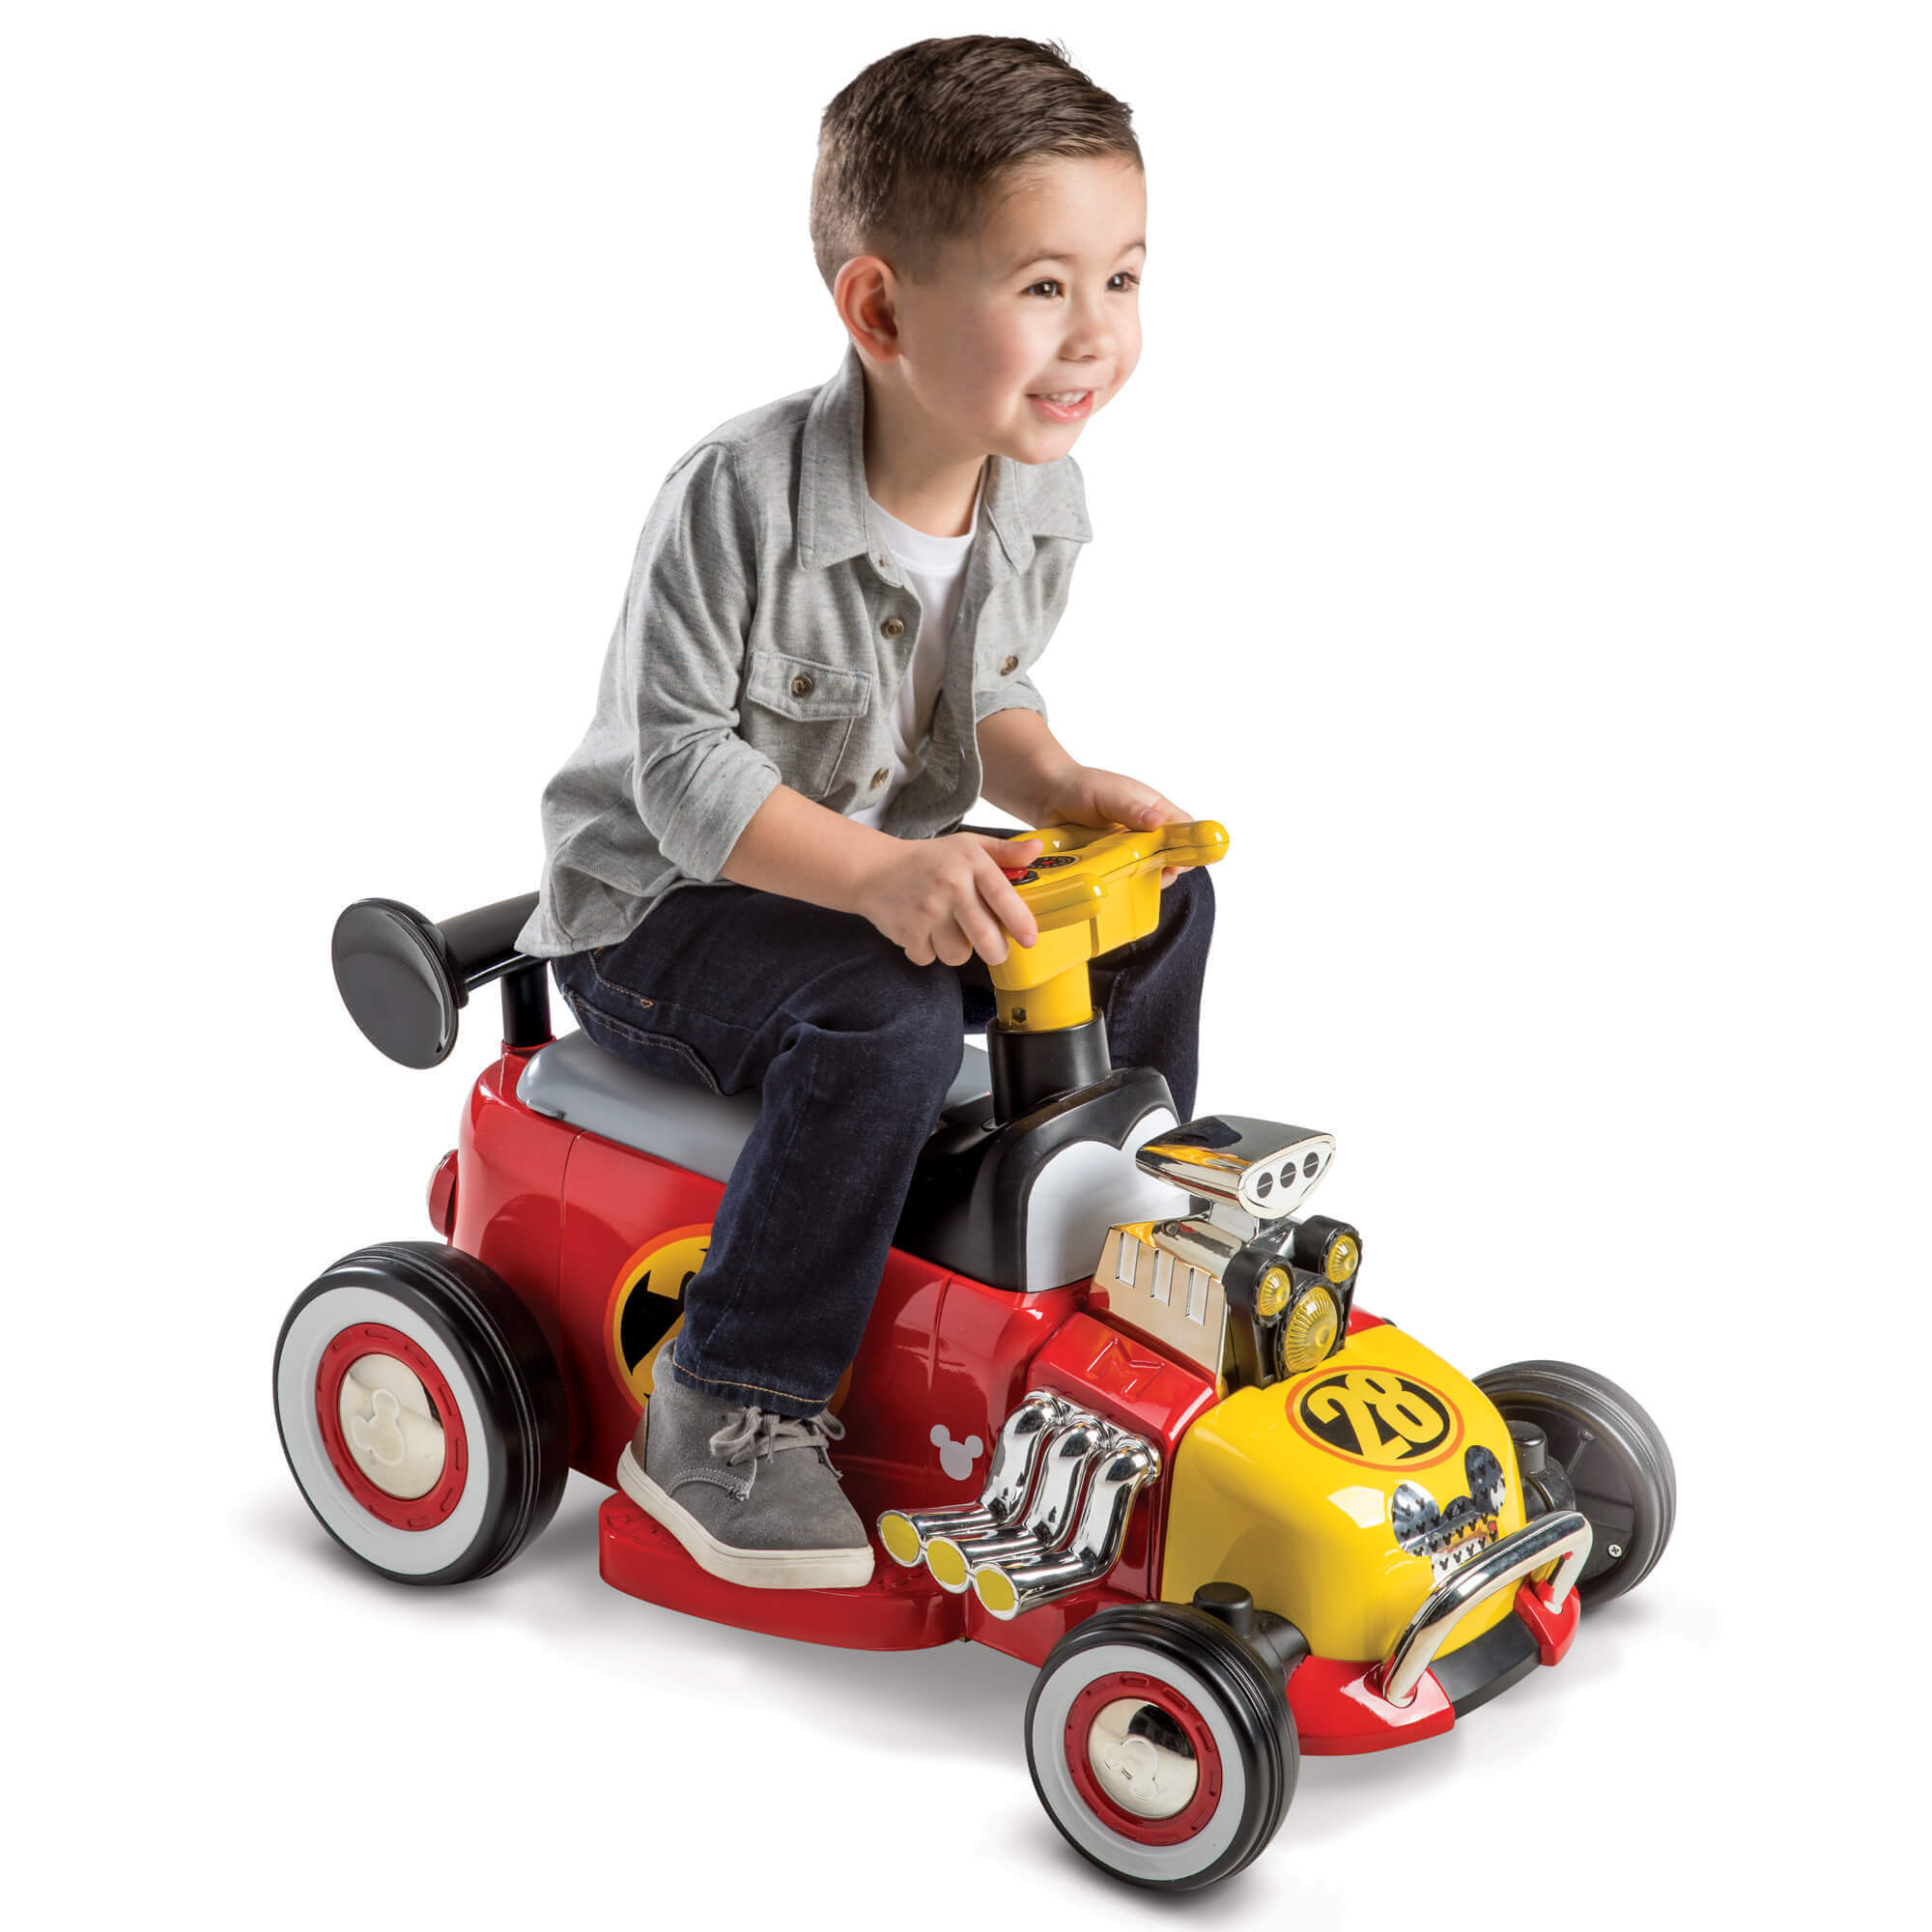 Disney Mickey Boys’ 6V Battery-Powered Ride-On Quad by Huffy - image 1 of 11